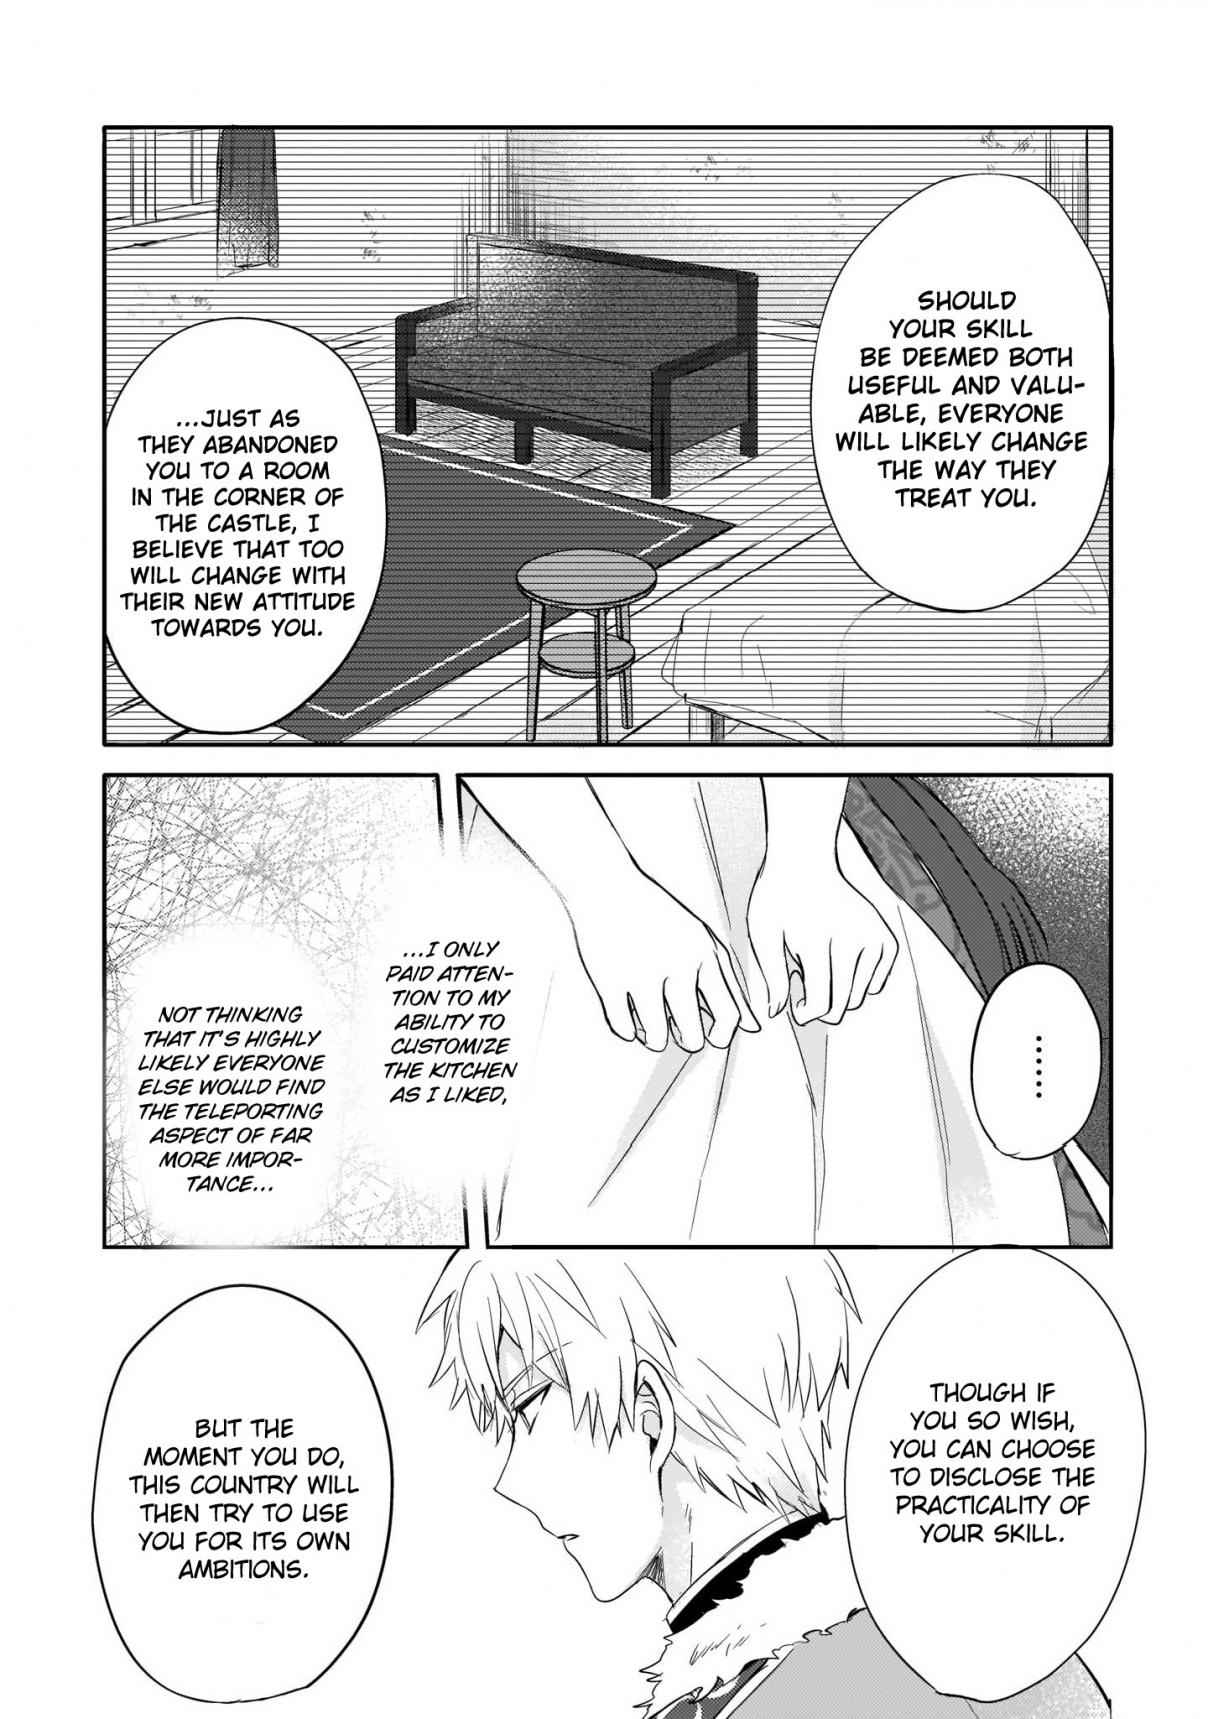 This "Summon Kitchen" Skill is Amazing! ~Amassing Points By Cooking in Another World~ Vol. 1 Ch. 2